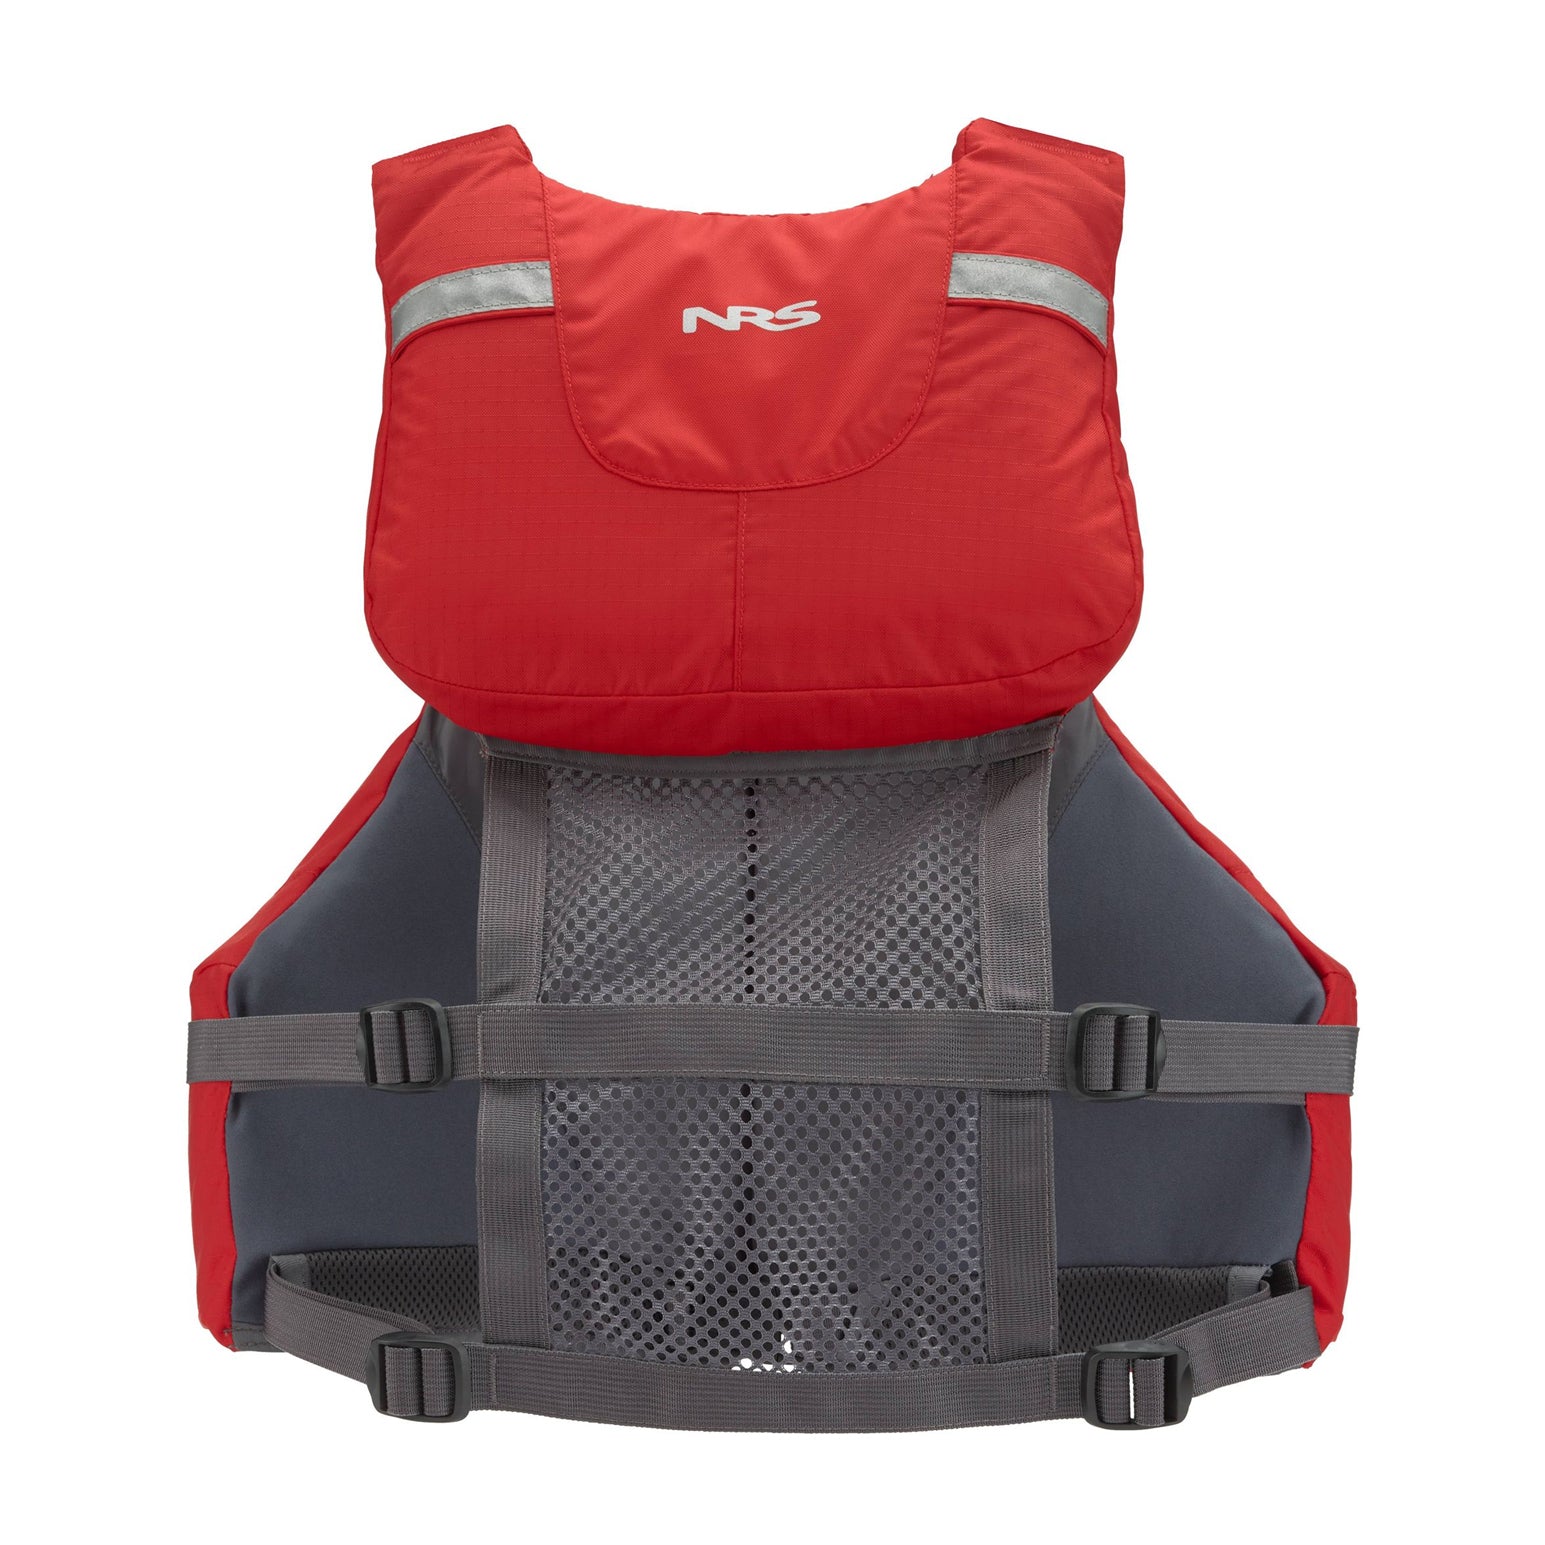 NRS CVest has a mesh rear panel and high back buoyancy design